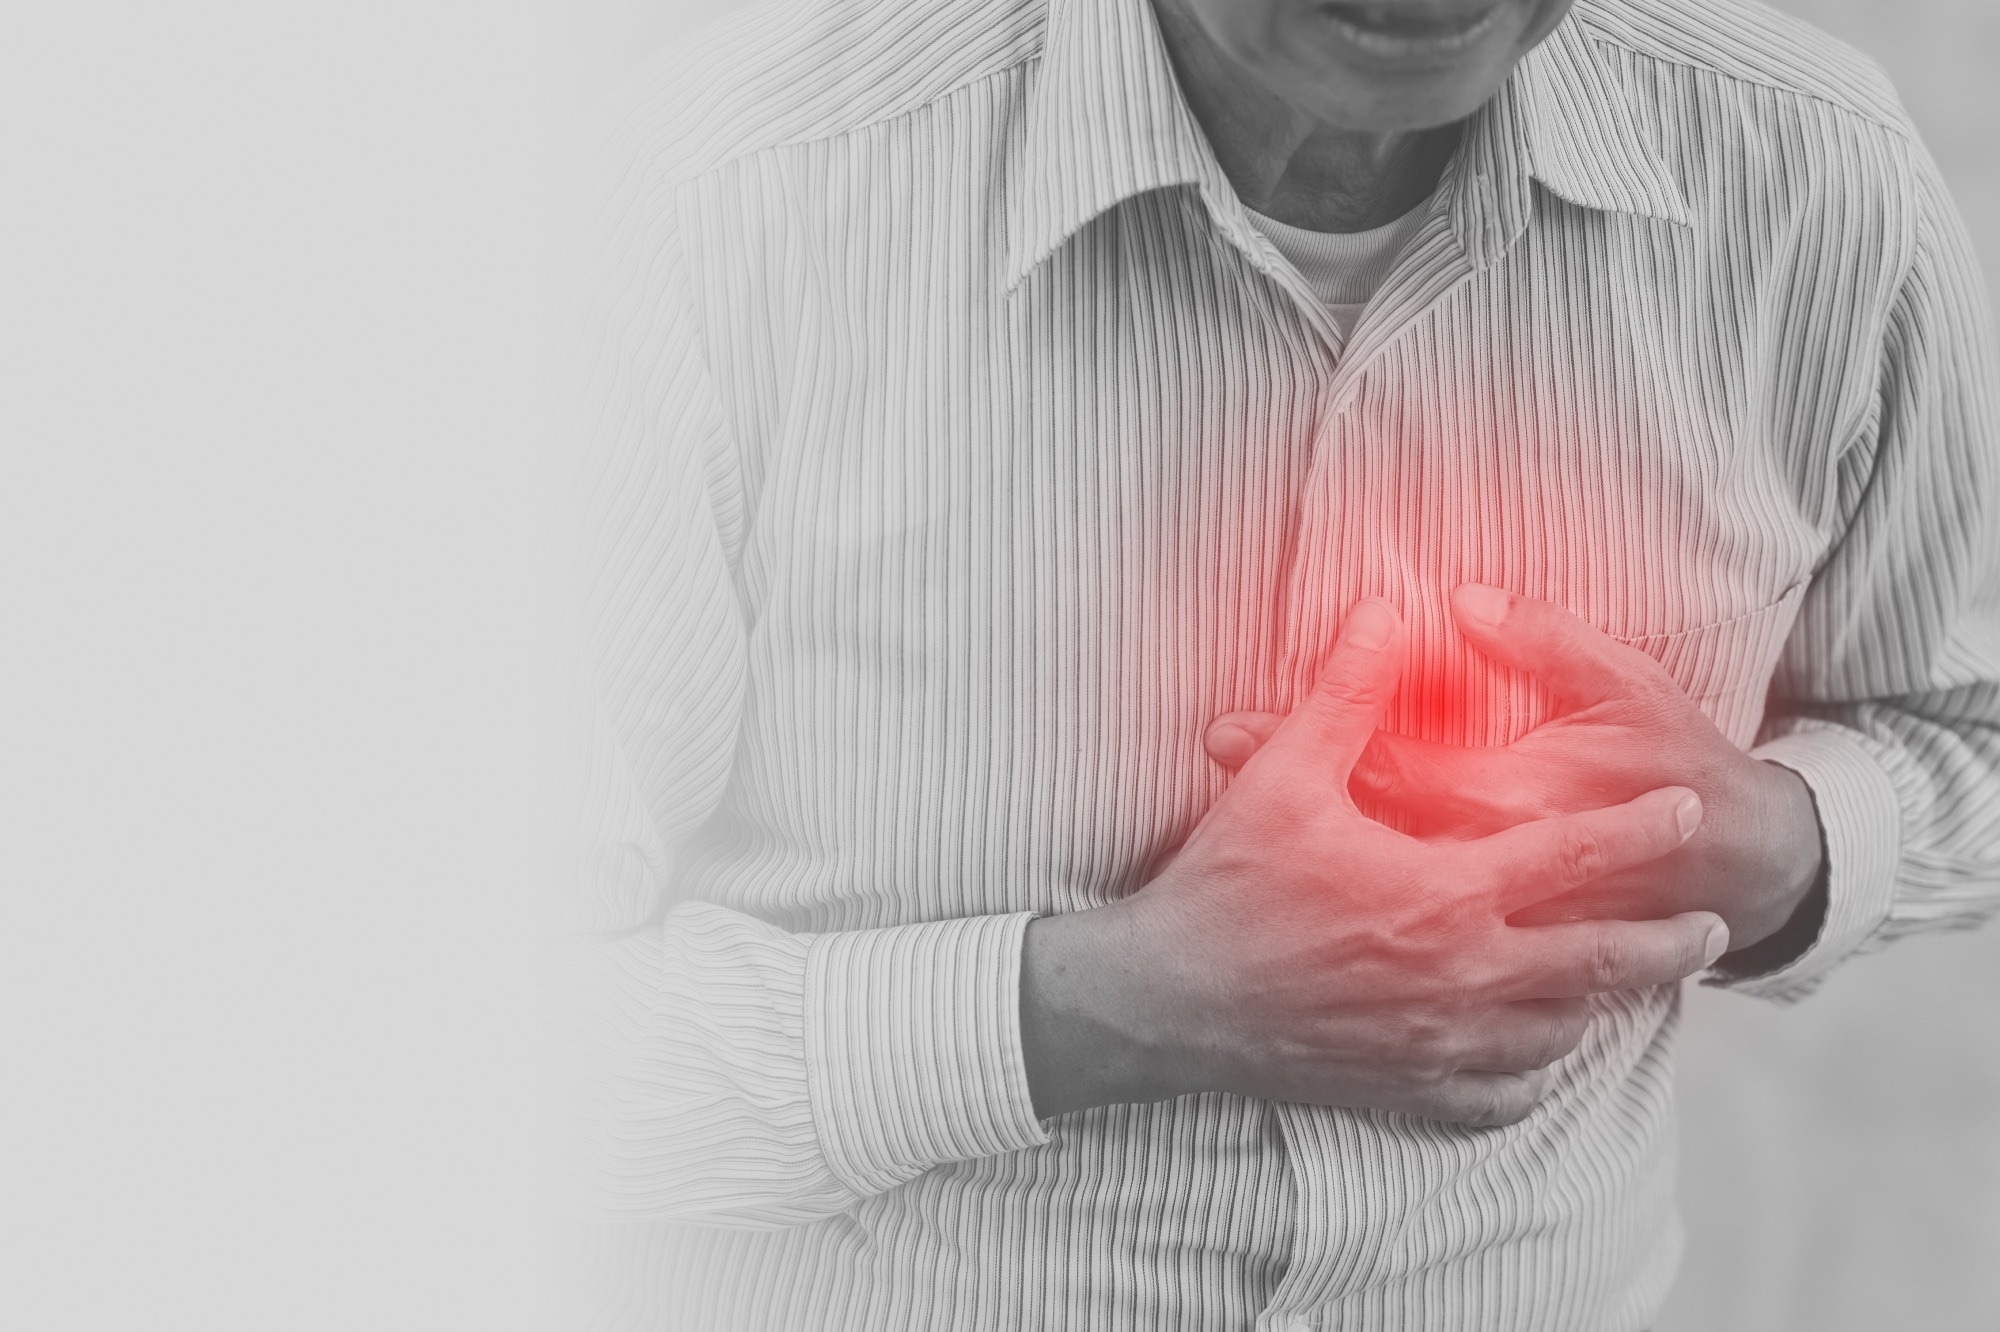 Digital tech could unlock warning signs for imminent sudden cardiac arrest pic